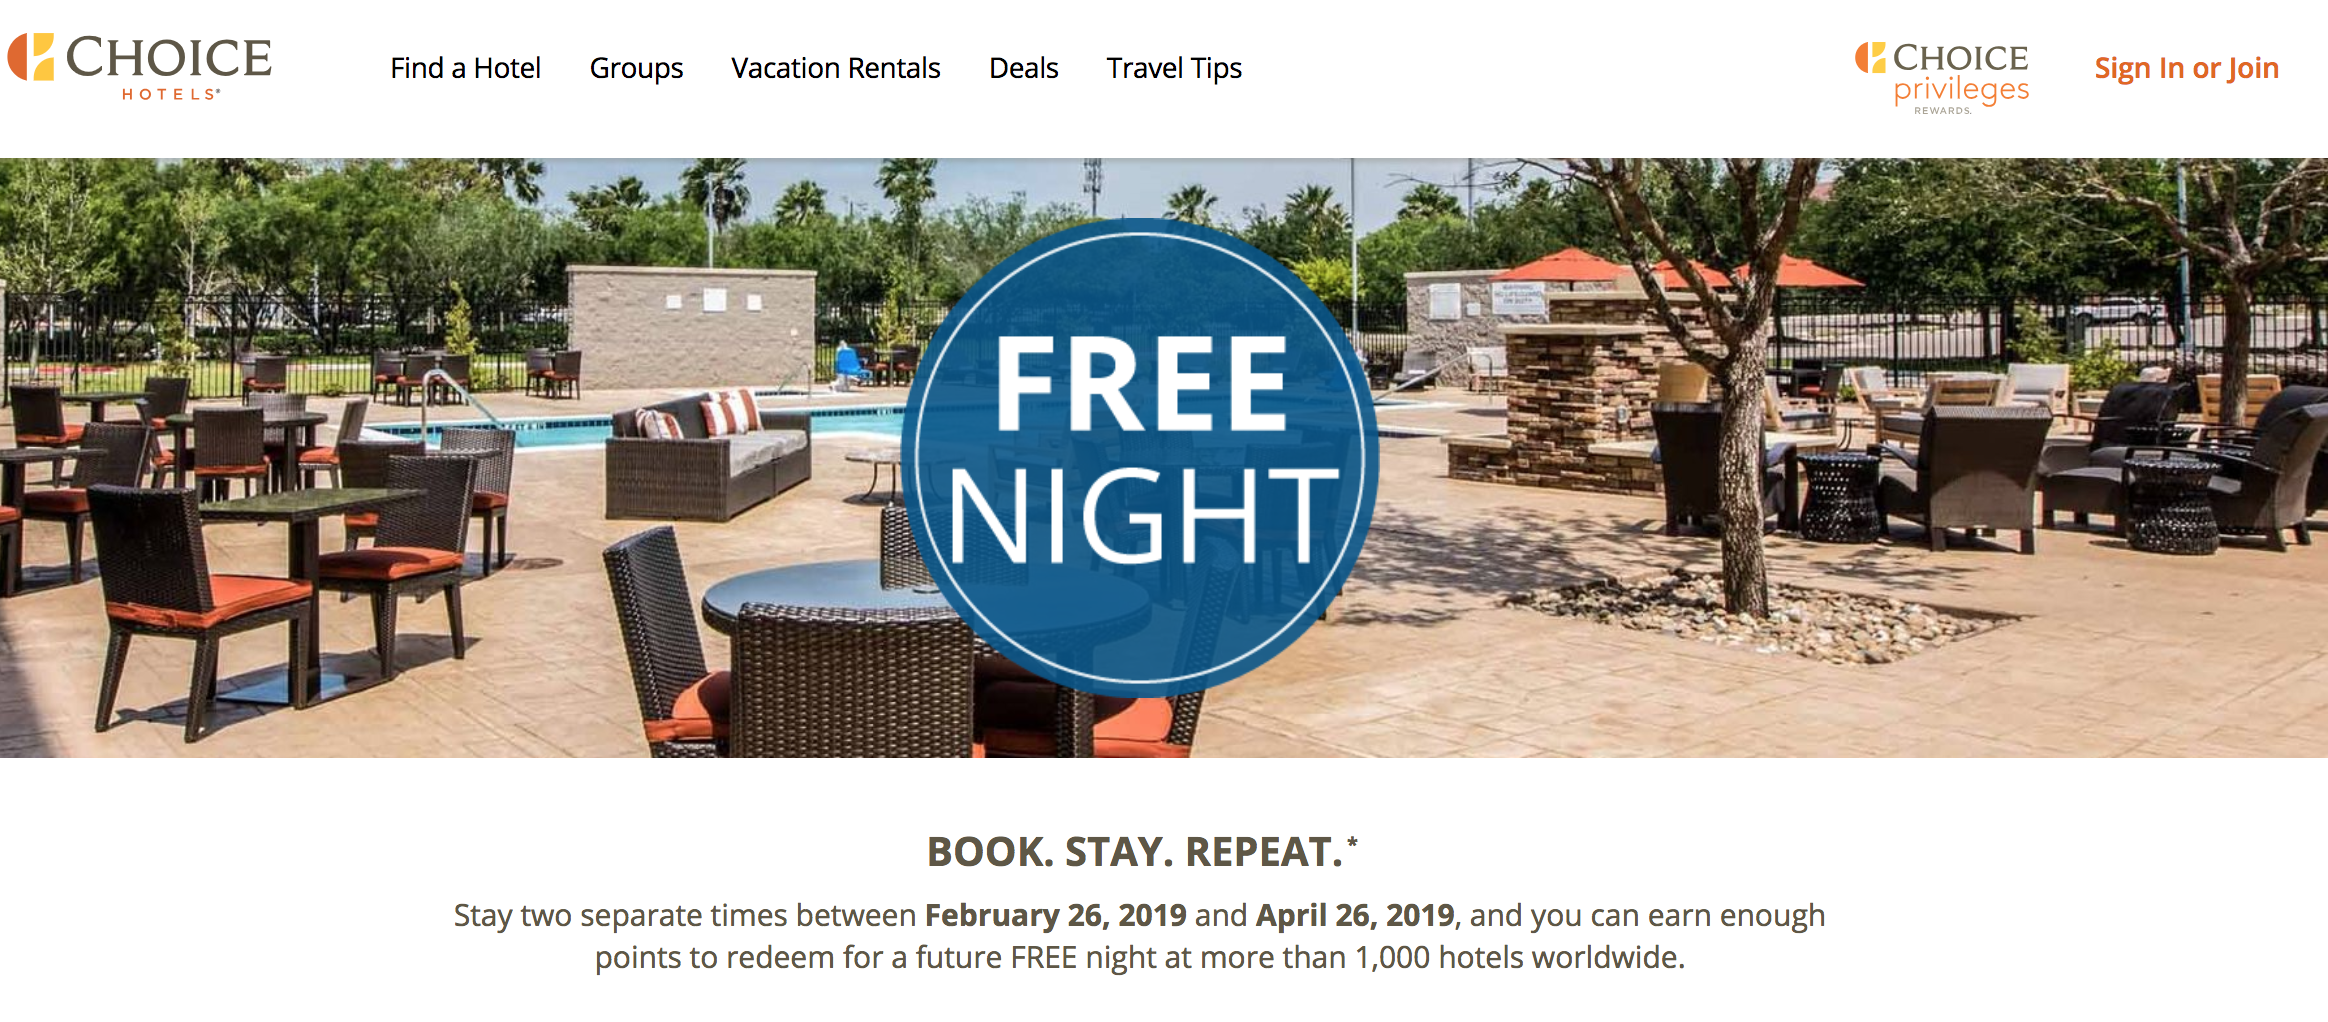 a advertisement for a vacation rental